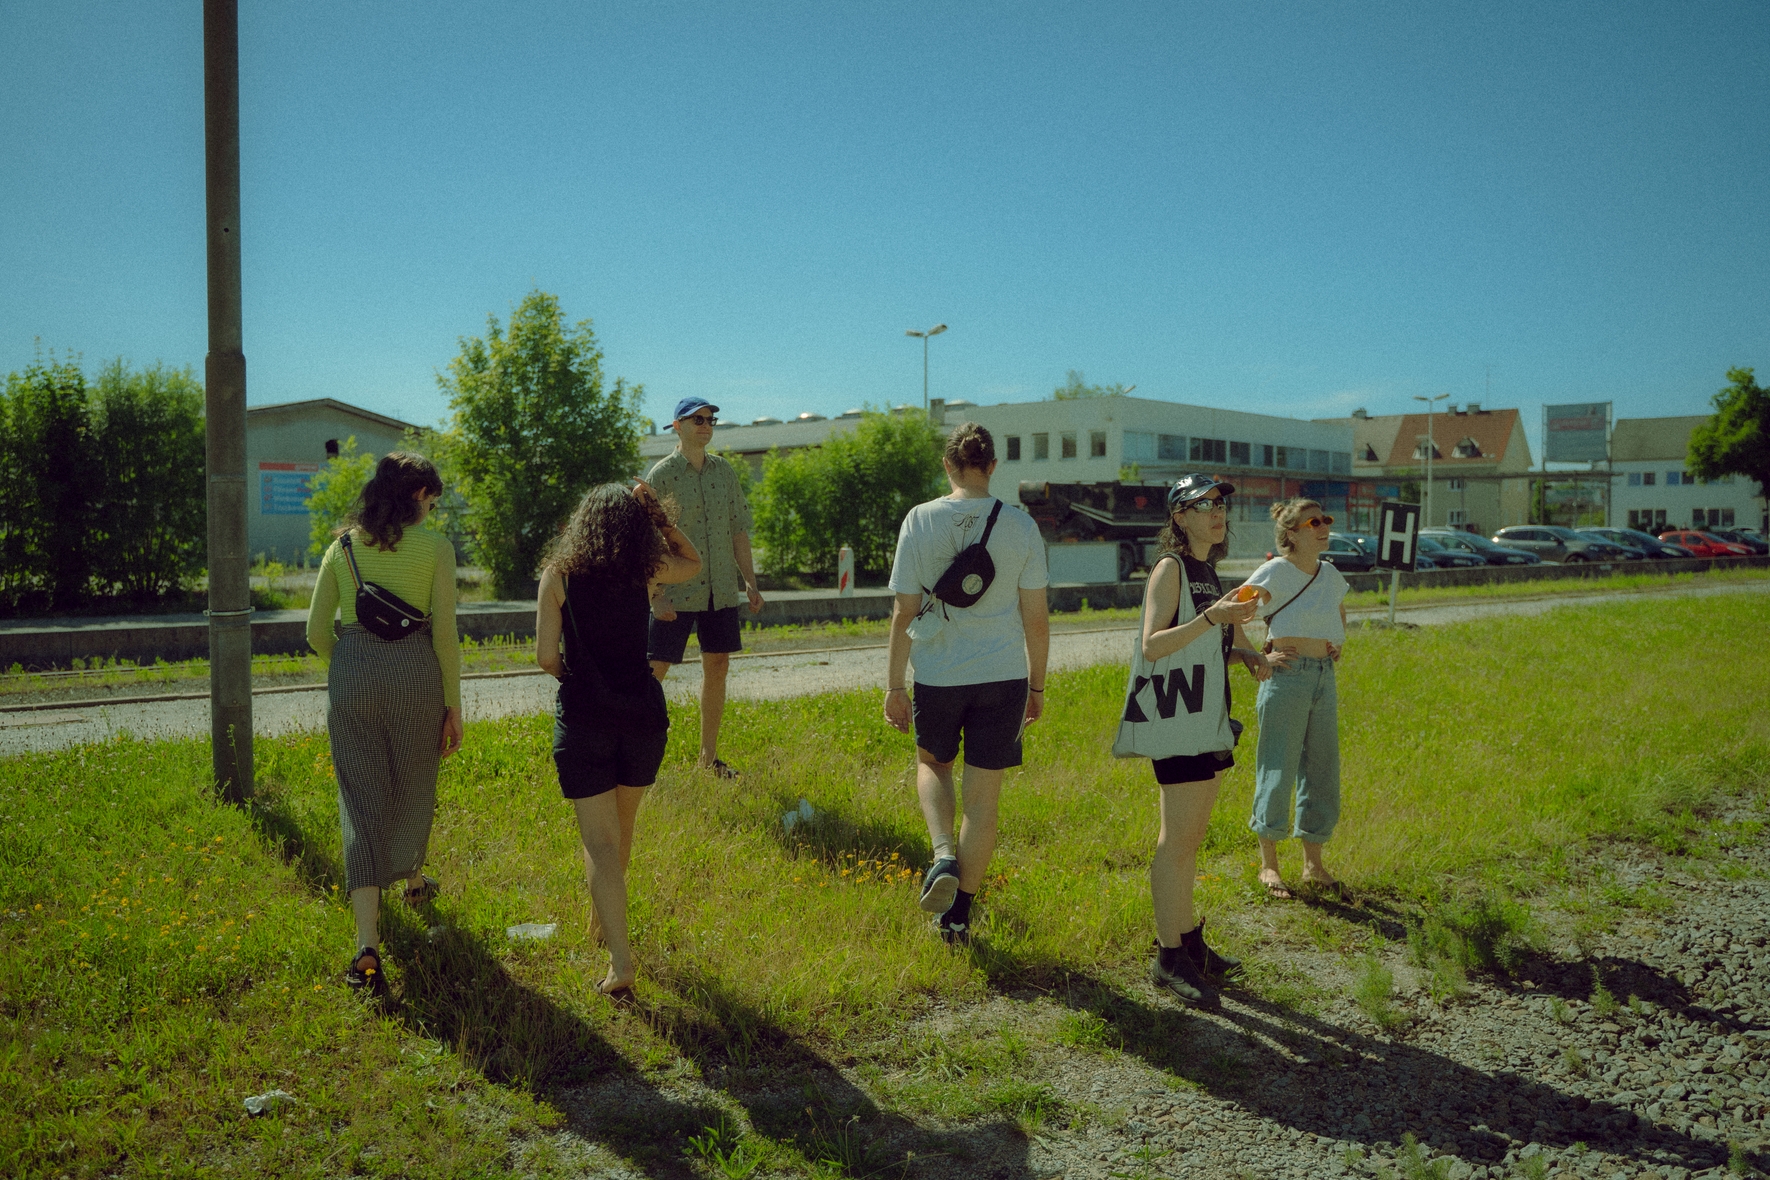 YOUKI, young people walking, gras, trainstation